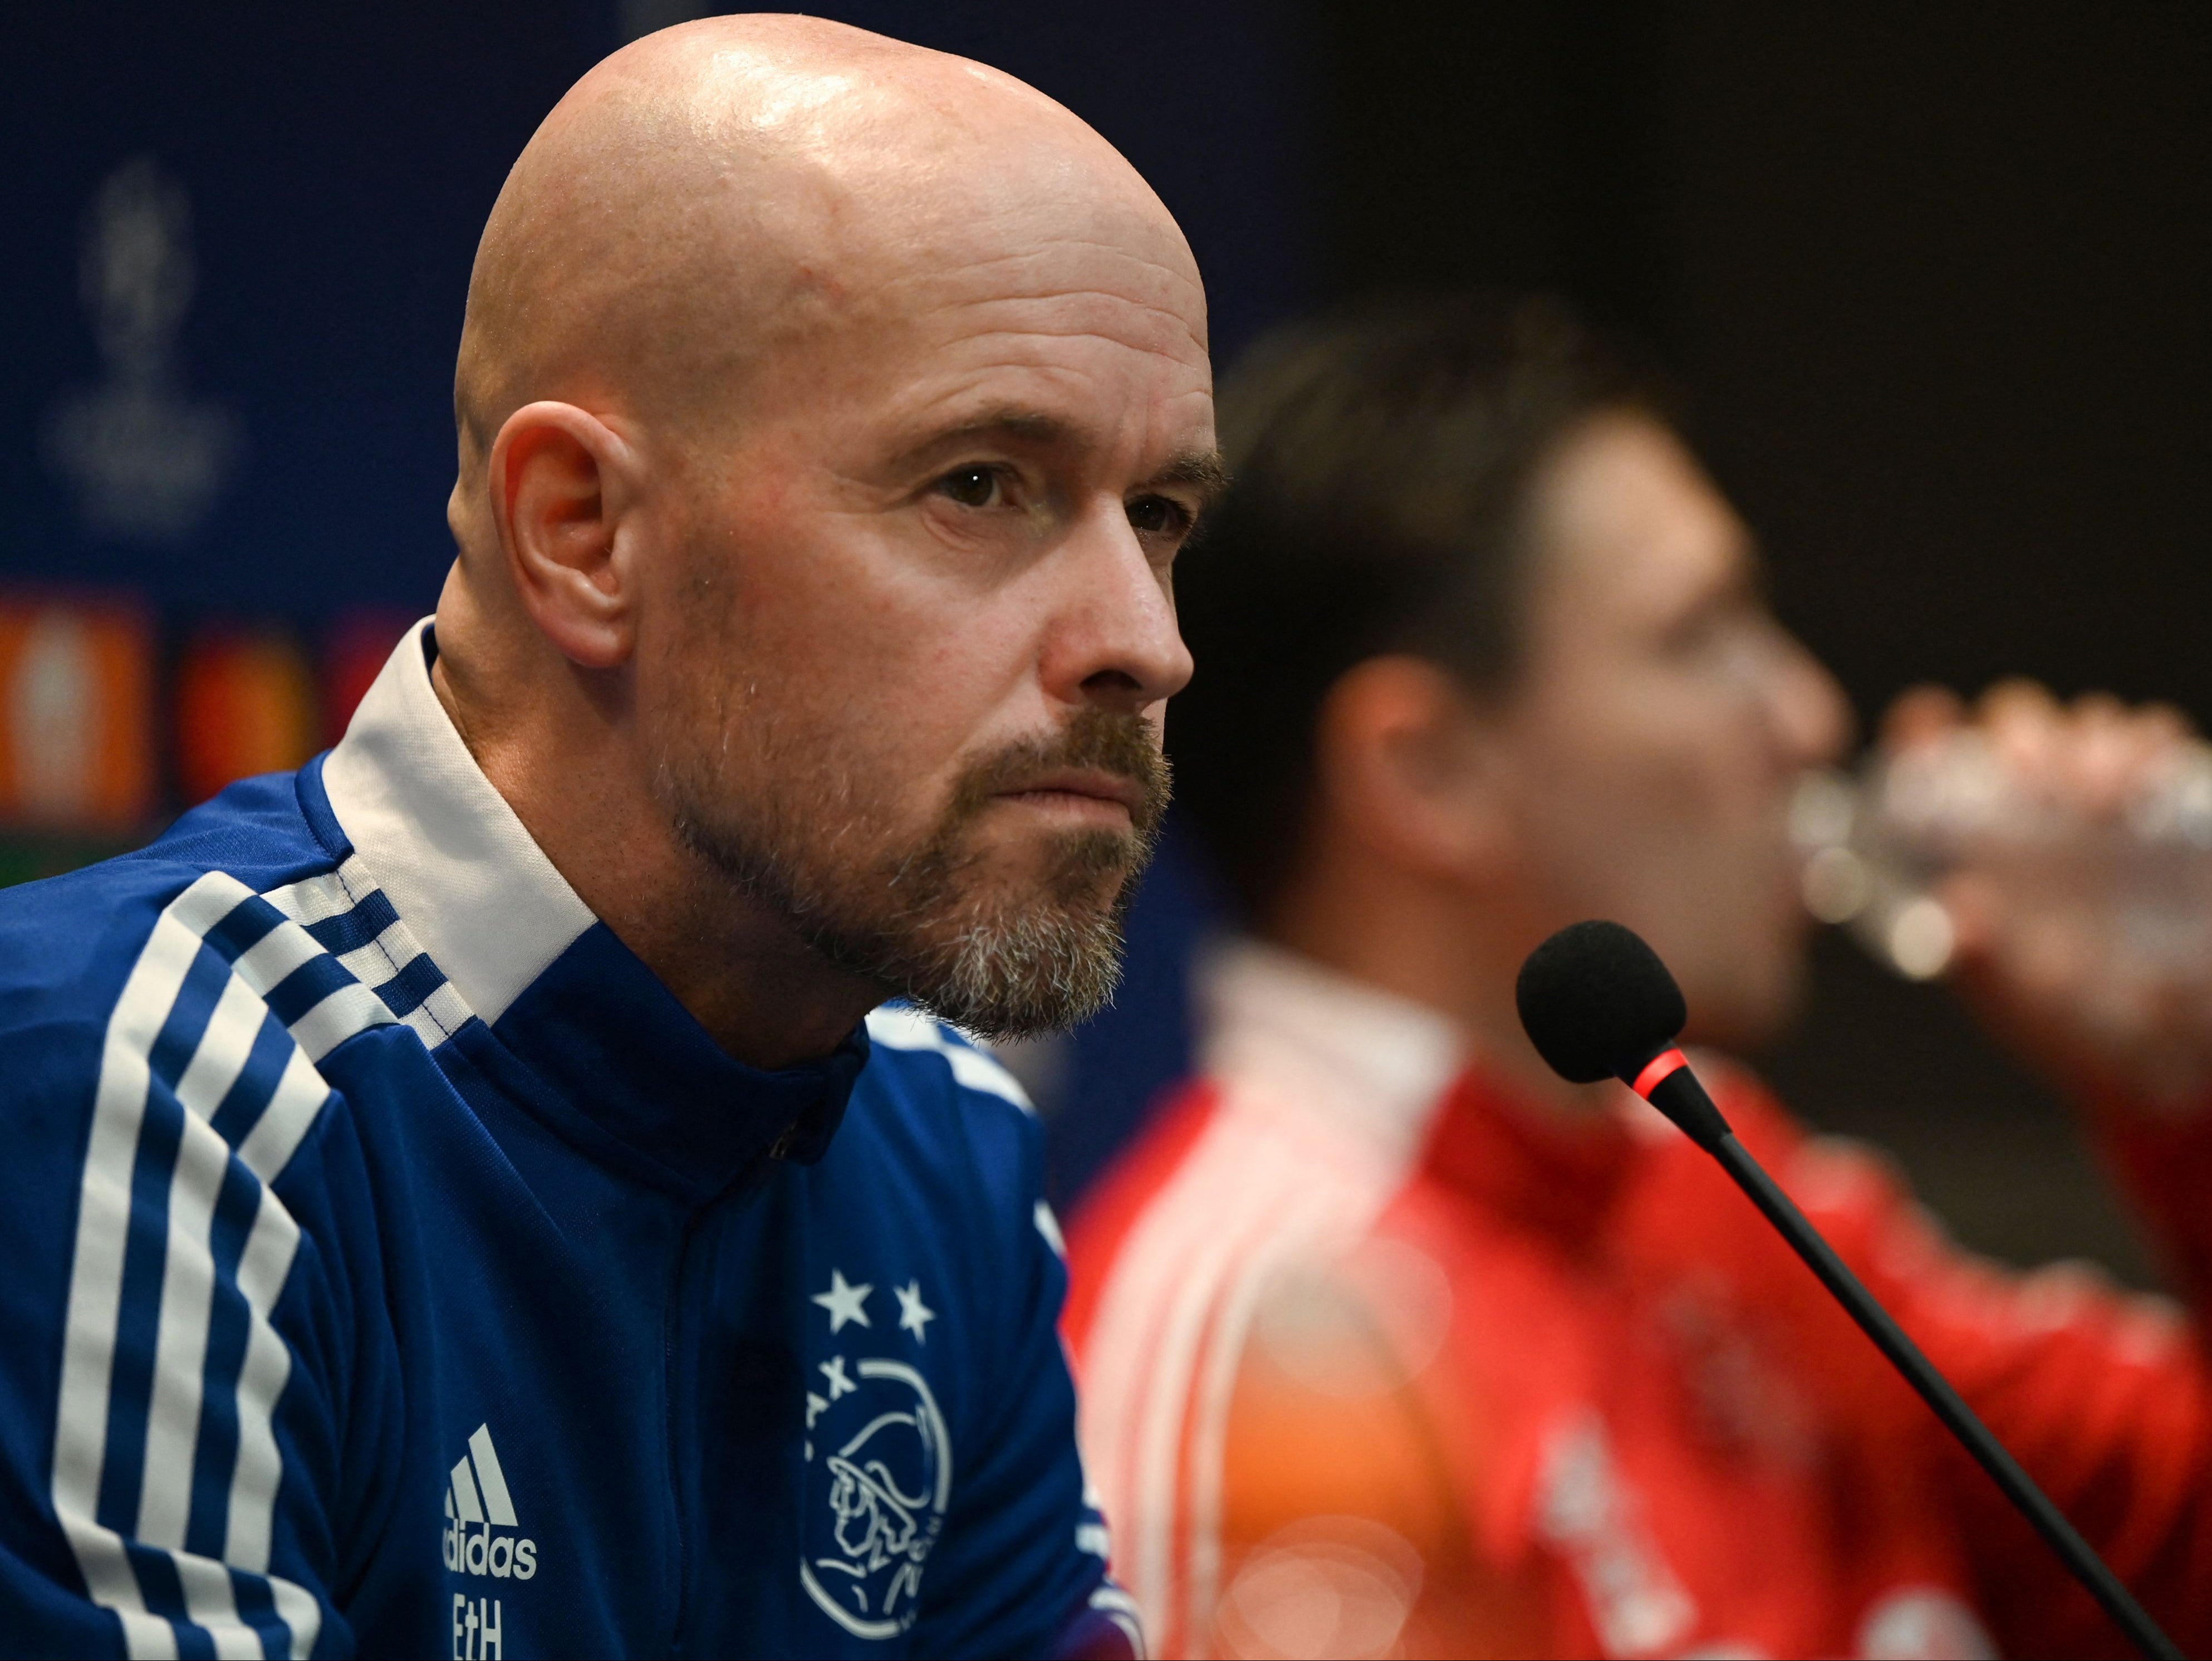 Ajax head coach Erik ten Hag is on the verge of joining Manchester United